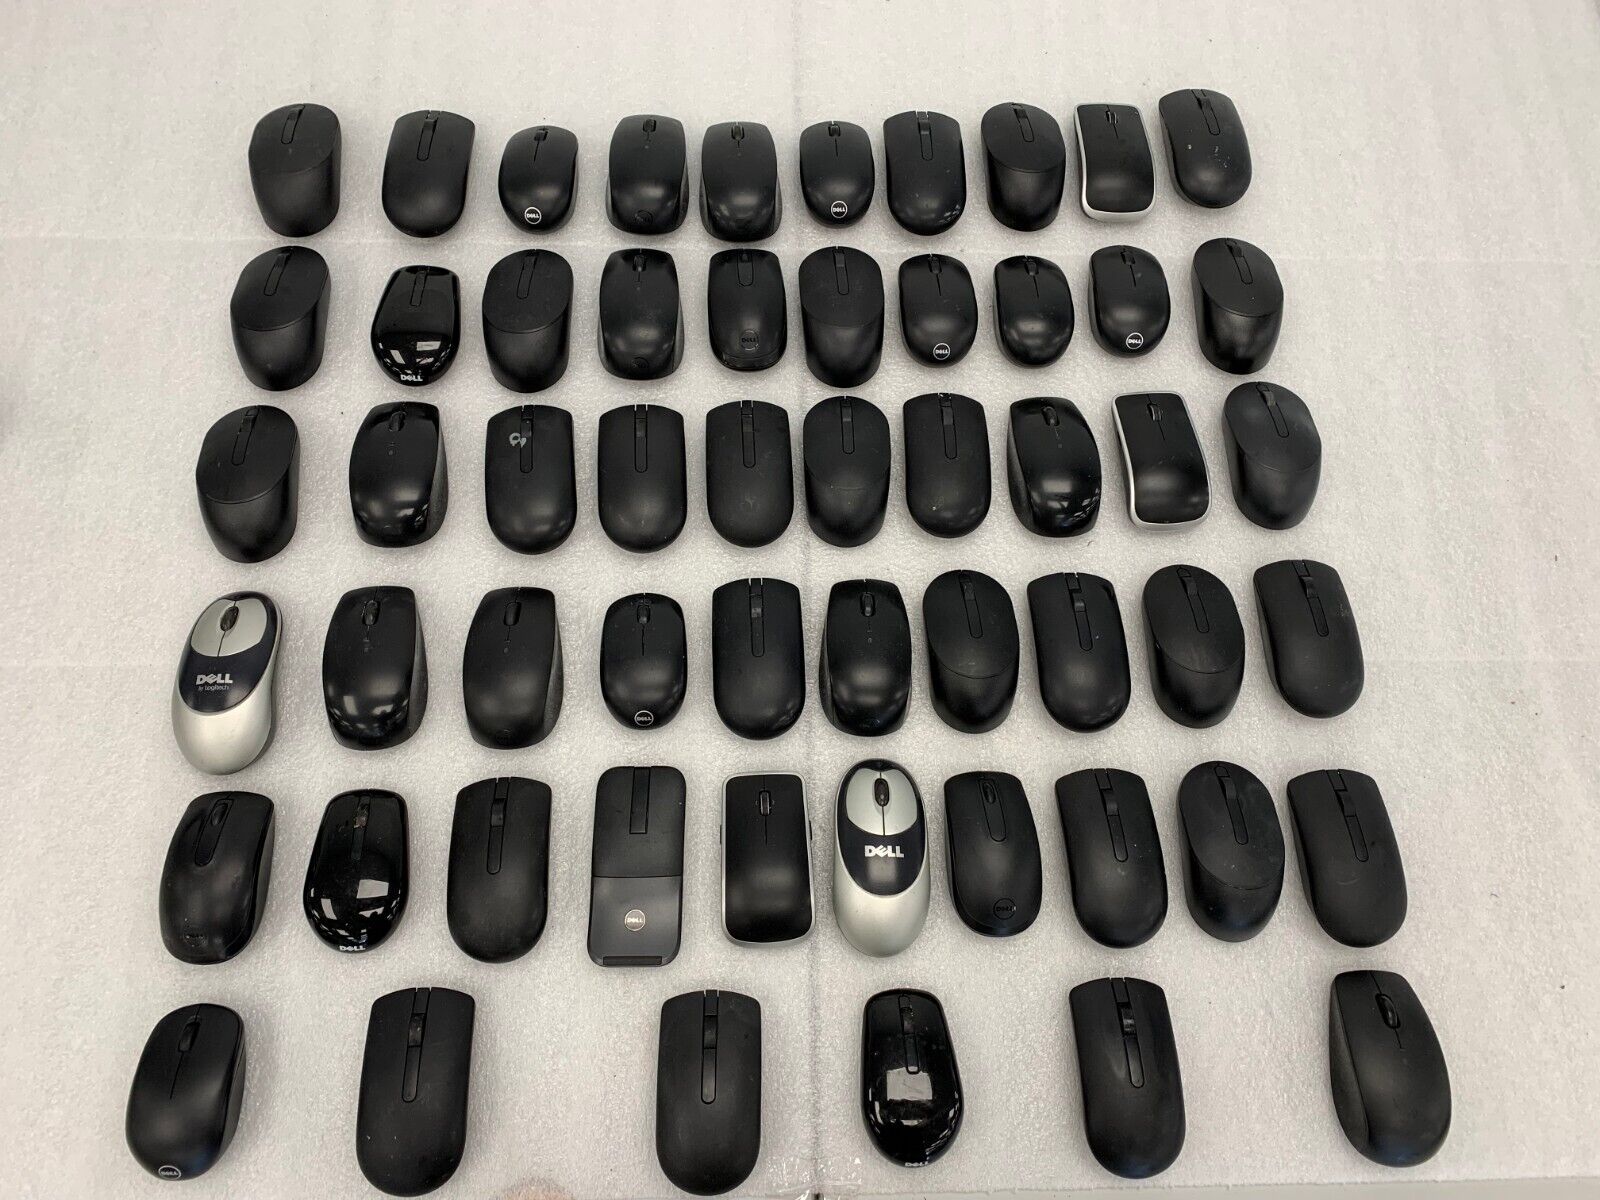 Mixed lot of 56 Dell Wireless Mice w/o receivers [See Desc] 